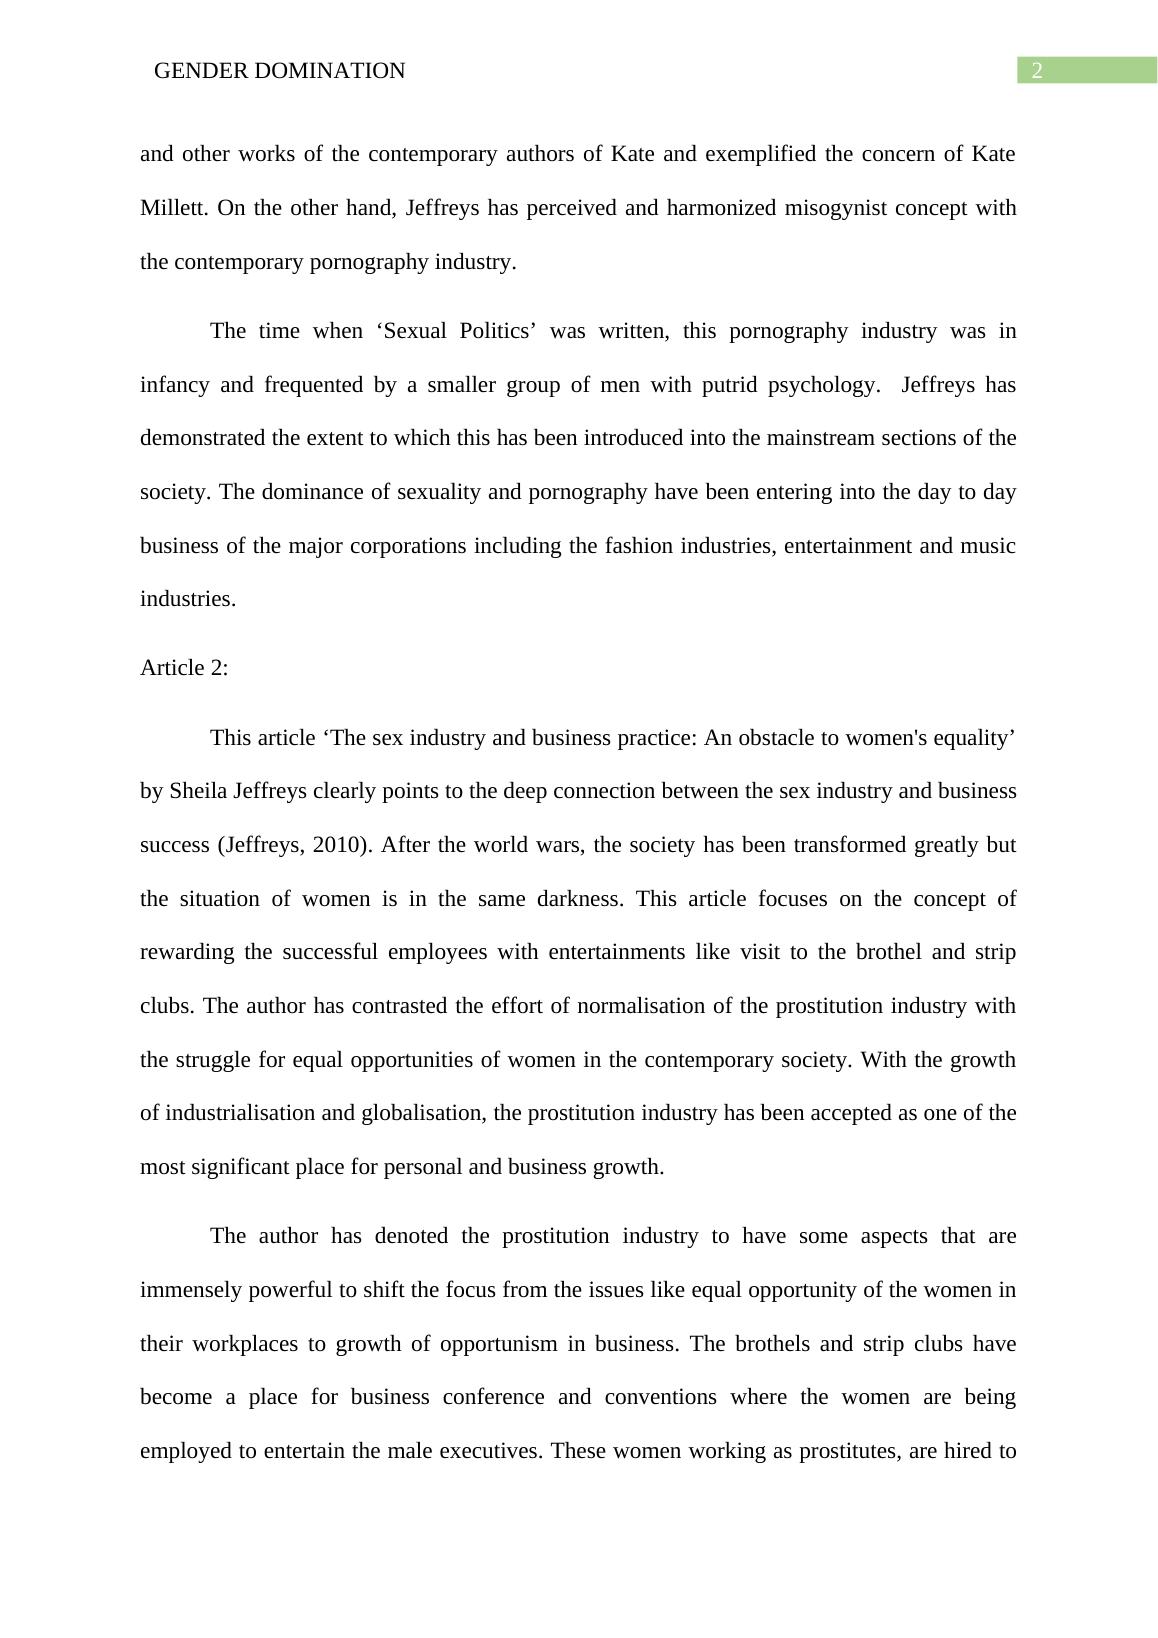 Assignment on Gender Domination PDF_3